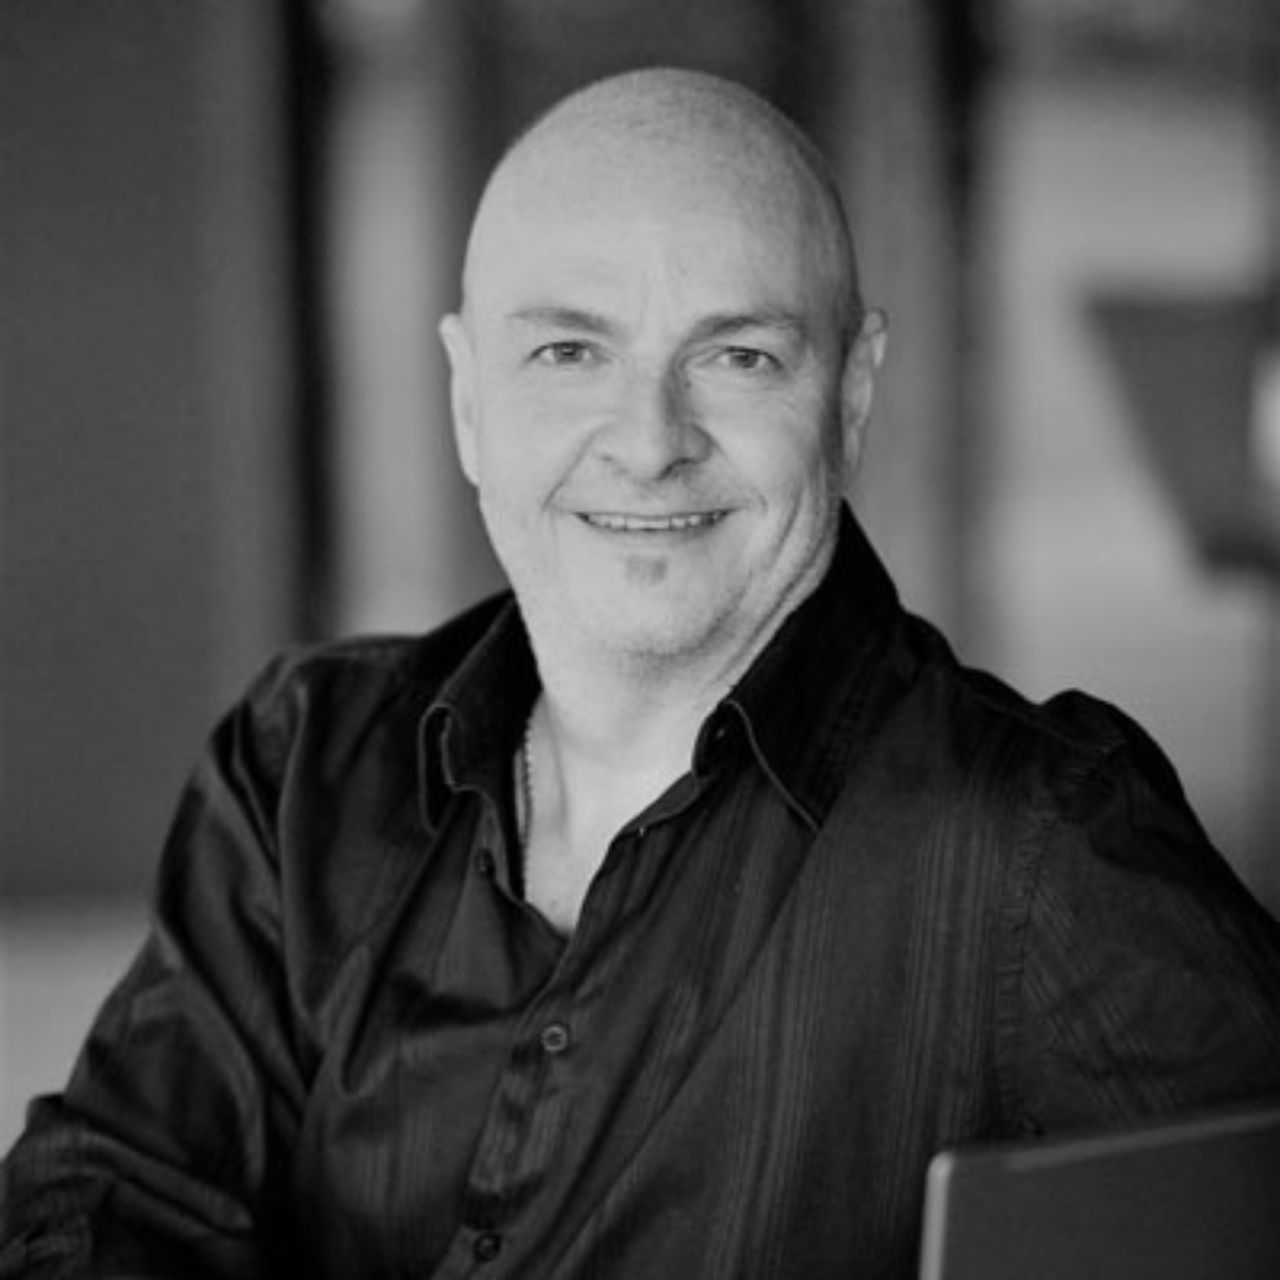 Mats Eriksson from Cairns HR Services - a bald man in a black shirt is smiling in a black and white photo .